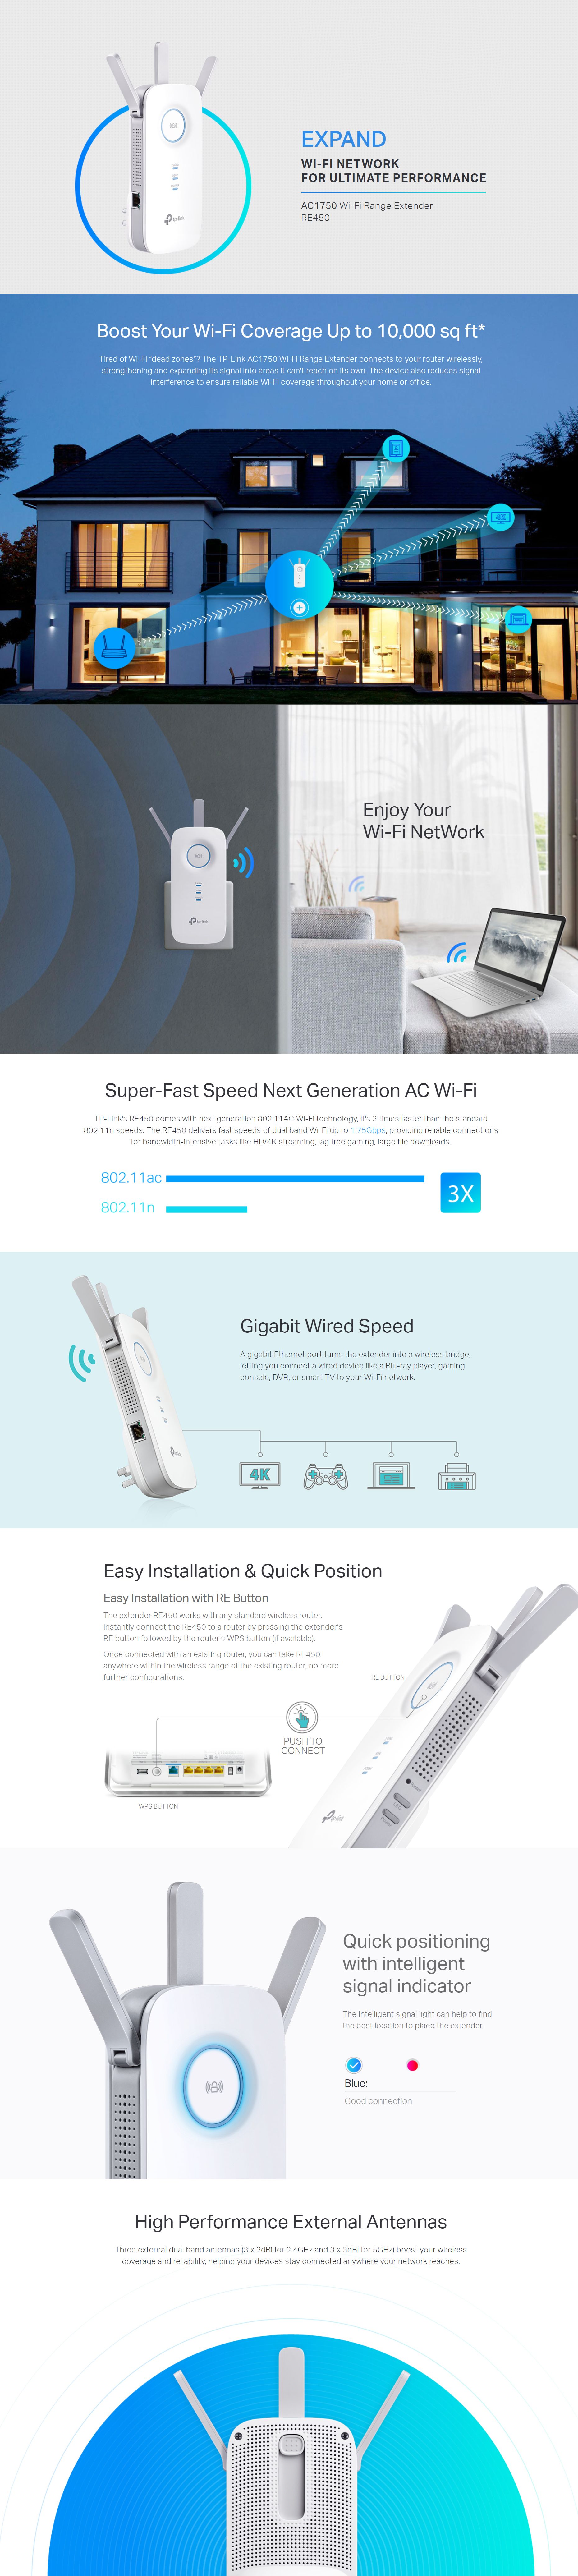 Tp Link Ac1750 Wi Fi Range Extender Re450 Review Pcmag